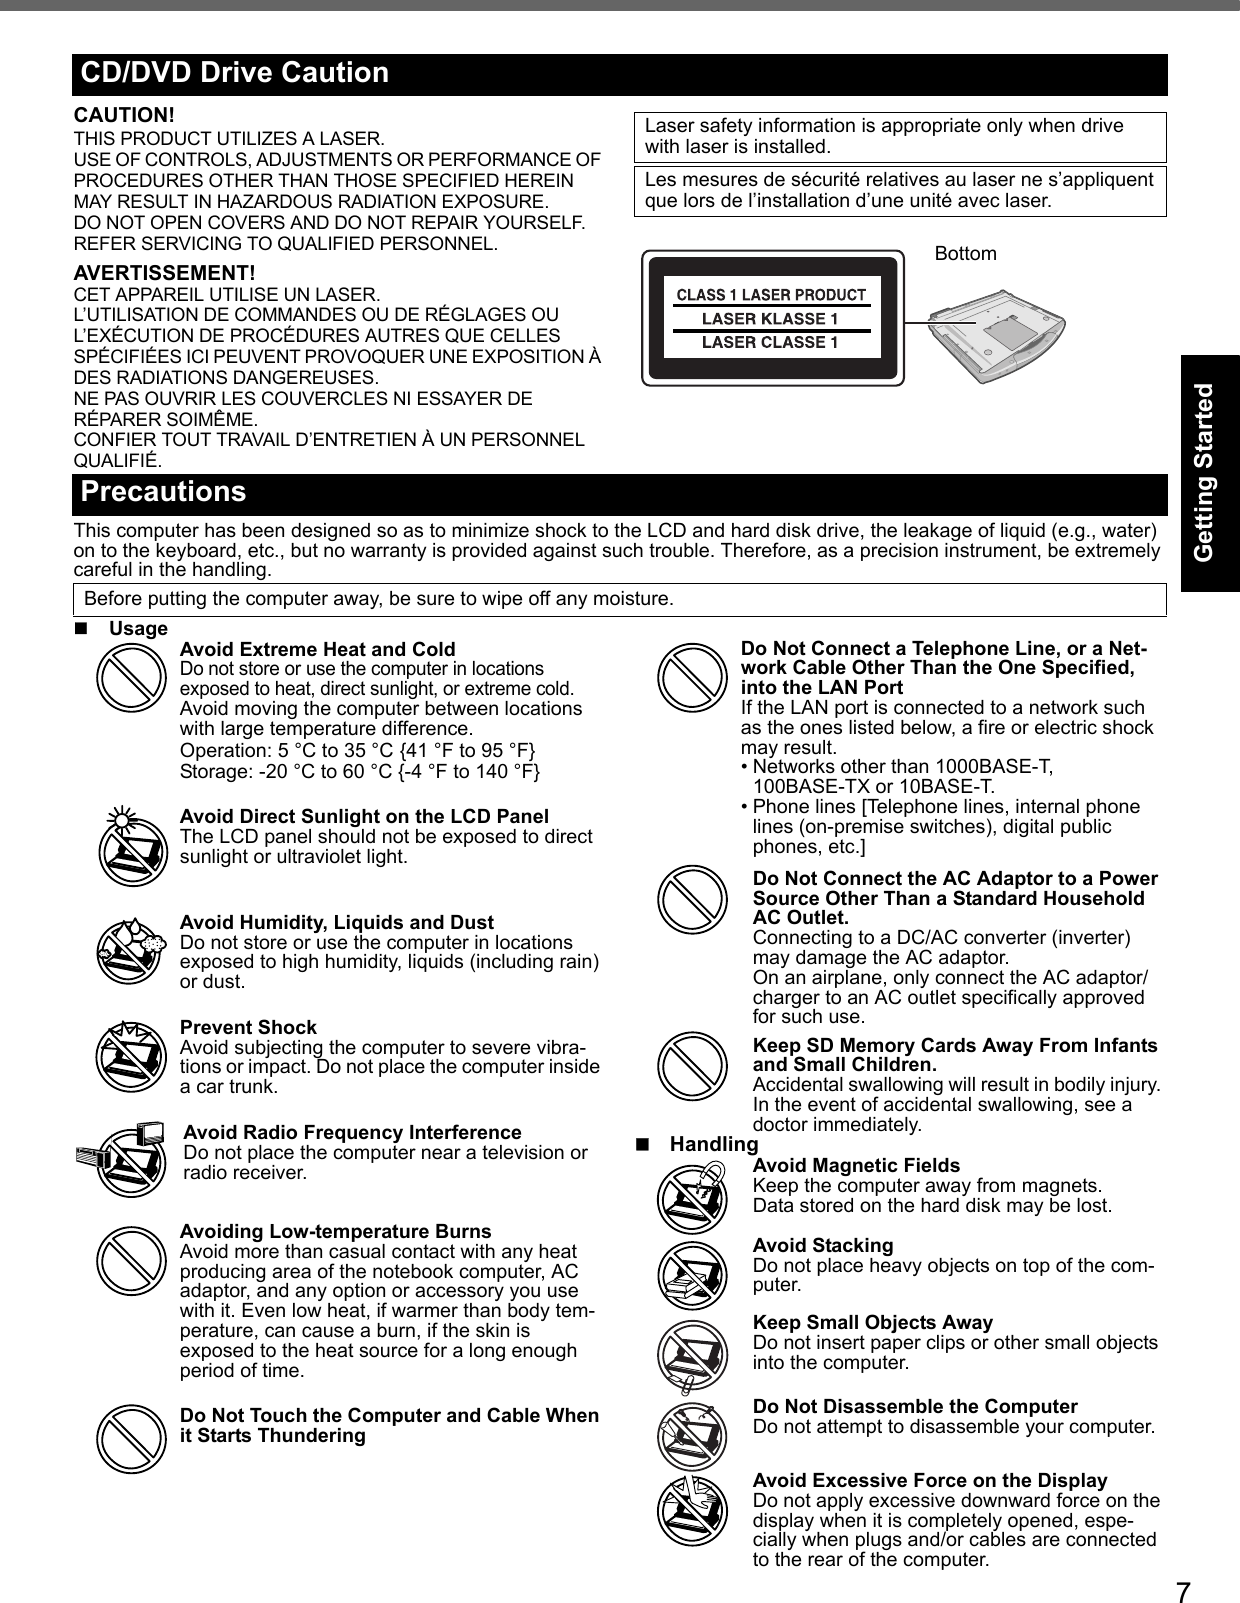 7Getting StartedUseful InformationTroubleshootingAppendixCAUTION!THIS PRODUCT UTILIZES A LASER.USE OF CONTROLS, ADJUSTMENTS OR PERFORMANCE OF PROCEDURES OTHER THAN THOSE SPECIFIED HEREIN MAY RESULT IN HAZARDOUS RADIATION EXPOSURE.DO NOT OPEN COVERS AND DO NOT REPAIR YOURSELF.REFER SERVICING TO QUALIFIED PERSONNEL.AVERTISSEMENT!CET APPAREIL UTILISE UN LASER.L’UTILISATION DE COMMANDES OU DE RÉGLAGES OU L’EXÉCUTION DE PROCÉDURES AUTRES QUE CELLES SPÉCIFIÉES ICI PEUVENT PROVOQUER UNE EXPOSITION À DES RADIATIONS DANGEREUSES.NE PAS OUVRIR LES COUVERCLES NI ESSAYER DE RÉPARER SOIMÊME.CONFIER TOUT TRAVAIL D’ENTRETIEN À UN PERSONNEL QUALIFIÉ.This computer has been designed so as to minimize shock to the LCD and hard disk drive, the leakage of liquid (e.g., water) on to the keyboard, etc., but no warranty is provided against such trouble. Therefore, as a precision instrument, be extremely careful in the handling.Usage Avoid Extreme Heat and ColdDo not store or use the computer in locations exposed to heat, direct sunlight, or extreme cold.Avoid moving the computer between locations with large temperature difference.Operation: 5 °C to 35 °C {41 °F to 95 °F}Storage: -20 °C to 60 °C {-4 °F to 140 °F}Avoid Direct Sunlight on the LCD PanelThe LCD panel should not be exposed to direct sunlight or ultraviolet light.Avoid Humidity, Liquids and DustDo not store or use the computer in locations exposed to high humidity, liquids (including rain) or dust.Prevent ShockAvoid subjecting the computer to severe vibra-tions or impact. Do not place the computer inside a car trunk.Avoid Radio Frequency InterferenceDo not place the computer near a television or radio receiver.Avoiding Low-temperature BurnsAvoid more than casual contact with any heat producing area of the notebook computer, AC adaptor, and any option or accessory you use with it. Even low heat, if warmer than body tem-perature, can cause a burn, if the skin is exposed to the heat source for a long enough period of time.Do Not Touch the Computer and Cable When it Starts ThunderingDo Not Connect a Telephone Line, or a Net-work Cable Other Than the One Specified, into the LAN PortIf the LAN port is connected to a network such as the ones listed below, a fire or electric shock may result.• Networks other than 1000BASE-T, 100BASE-TX or 10BASE-T.• Phone lines [Telephone lines, internal phone lines (on-premise switches), digital public phones, etc.]Do Not Connect the AC Adaptor to a Power Source Other Than a Standard Household AC Outlet.Connecting to a DC/AC converter (inverter) may damage the AC adaptor.On an airplane, only connect the AC adaptor/charger to an AC outlet specifically approved for such use.Keep SD Memory Cards Away From Infants and Small Children.Accidental swallowing will result in bodily injury. In the event of accidental swallowing, see a doctor immediately.HandlingAvoid Magnetic FieldsKeep the computer away from magnets.Data stored on the hard disk may be lost.Avoid StackingDo not place heavy objects on top of the com-puter.Keep Small Objects AwayDo not insert paper clips or other small objects into the computer.Do Not Disassemble the ComputerDo not attempt to disassemble your computer.Avoid Excessive Force on the DisplayDo not apply excessive downward force on the display when it is completely opened, espe-cially when plugs and/or cables are connected to the rear of the computer.CD/DVD Drive CautionLaser safety information is appropriate only when drive with laser is installed.Les mesures de sécurité relatives au laser ne s’appliquent que lors de l’installation d’une unité avec laser. BottomPrecautionsBefore putting the computer away, be sure to wipe off any moisture.